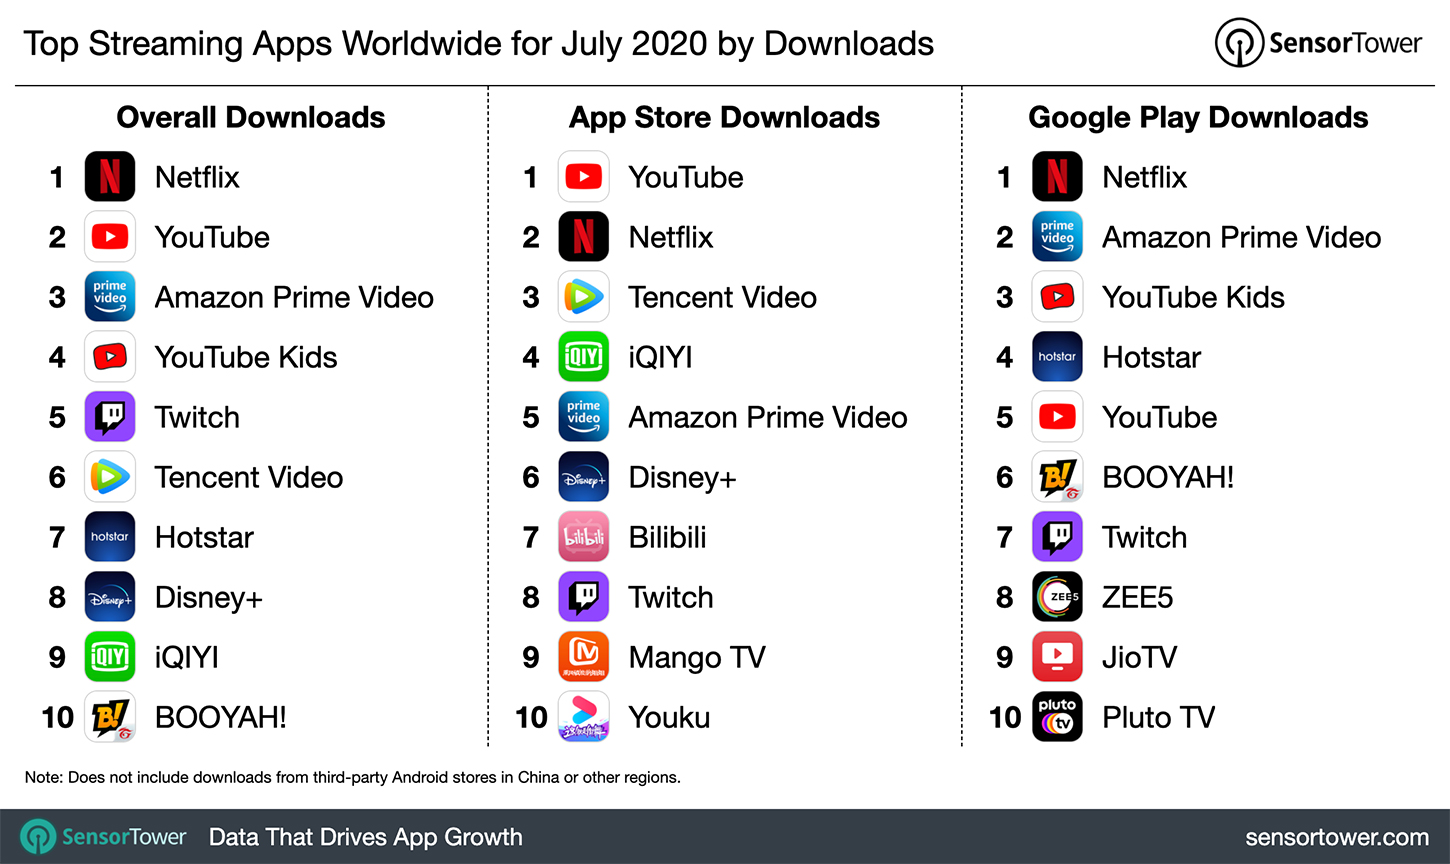 Top Streaming Apps Worldwide for July 2020 by Downloads